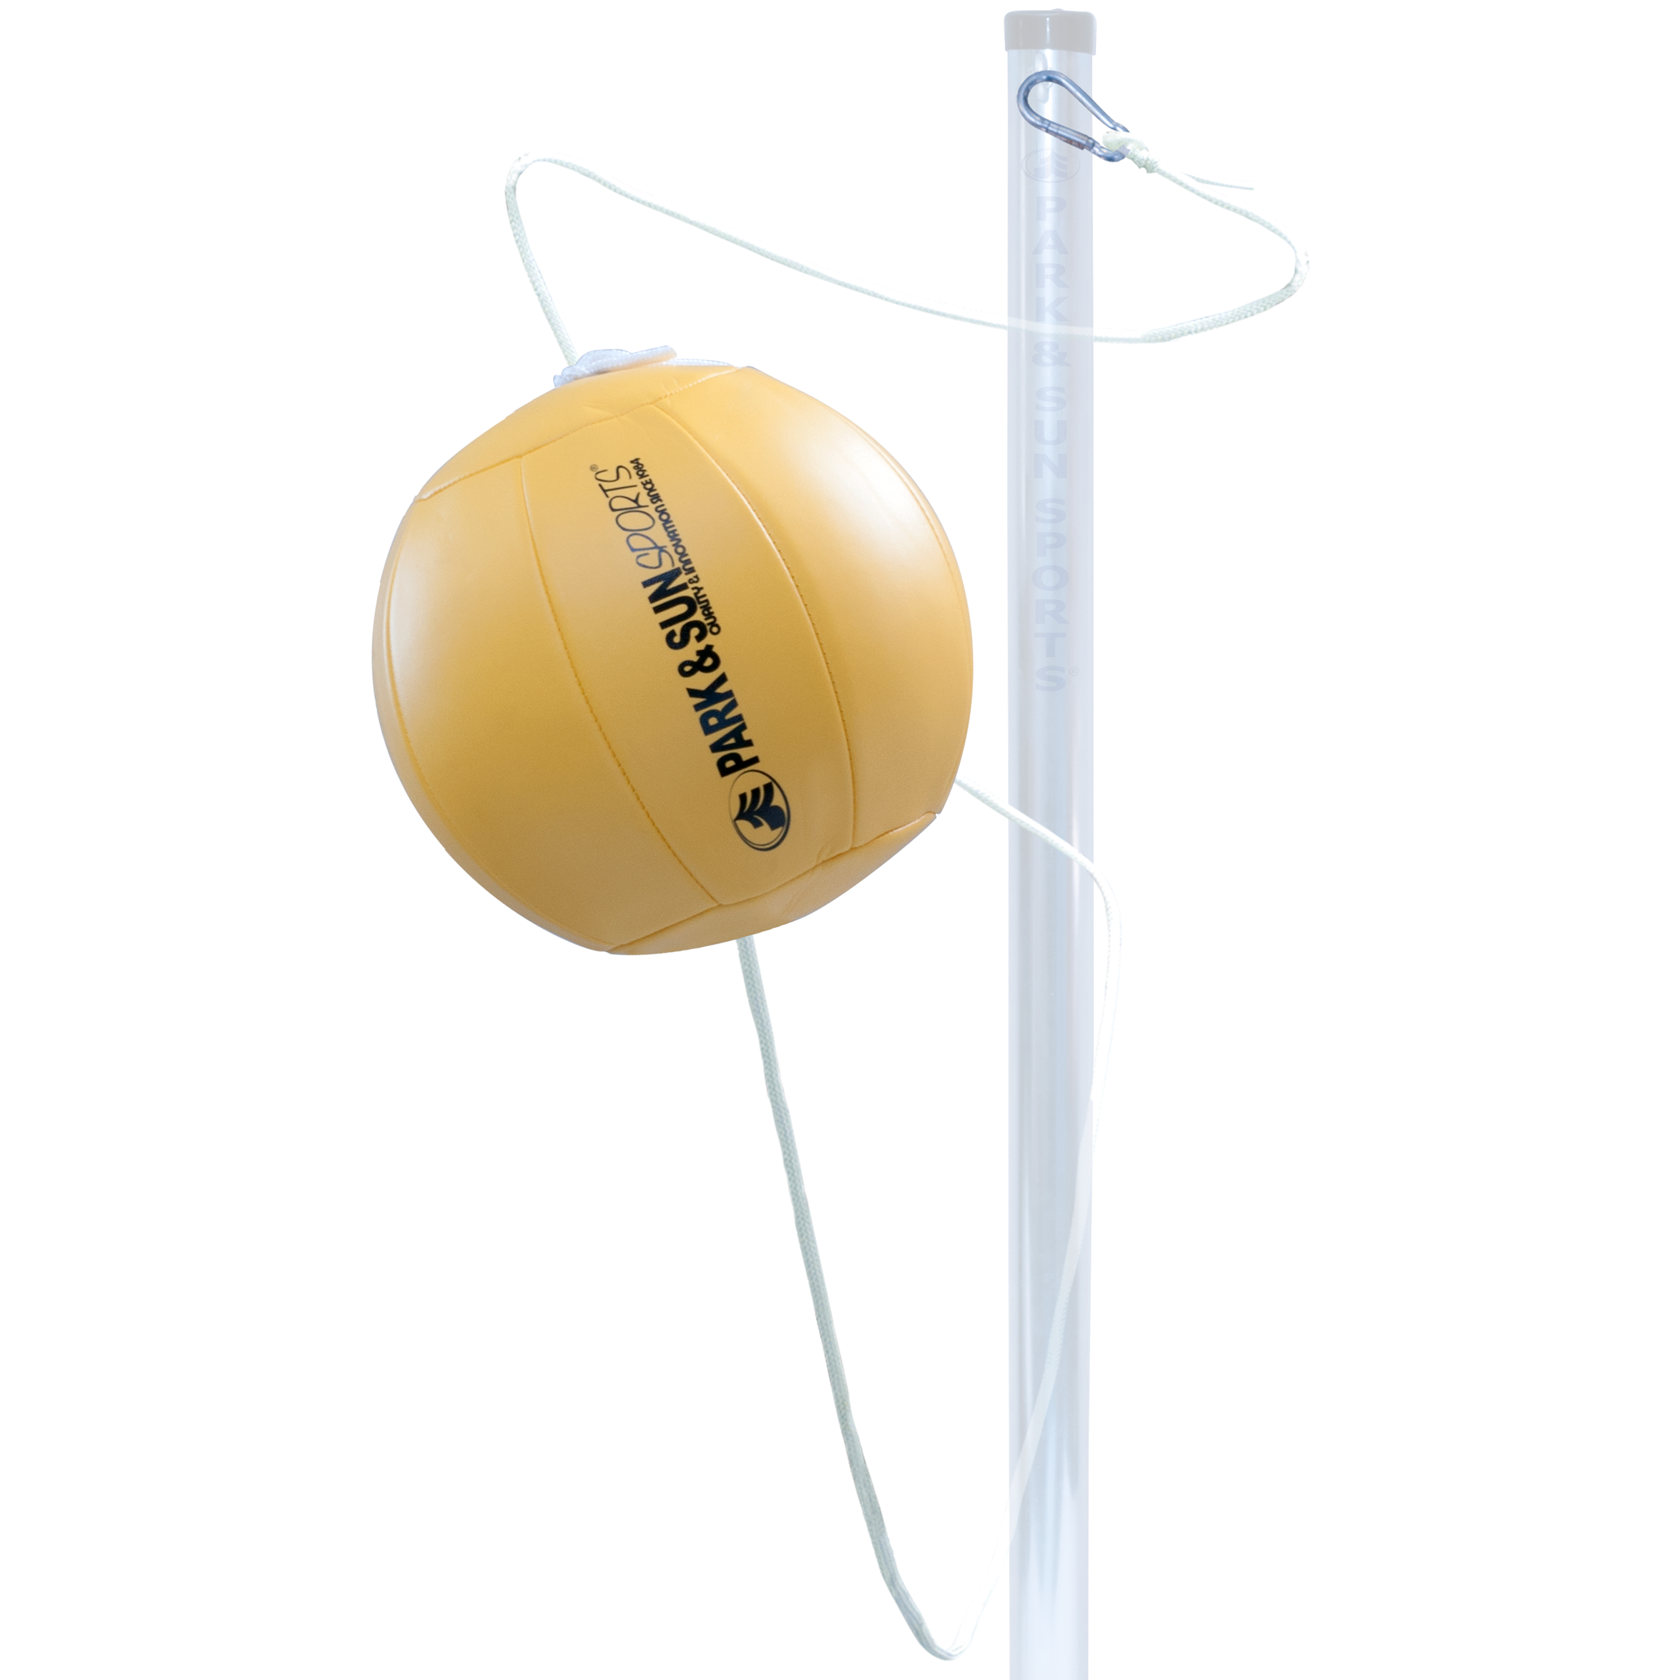 Park and Sports Portable Tetherball base